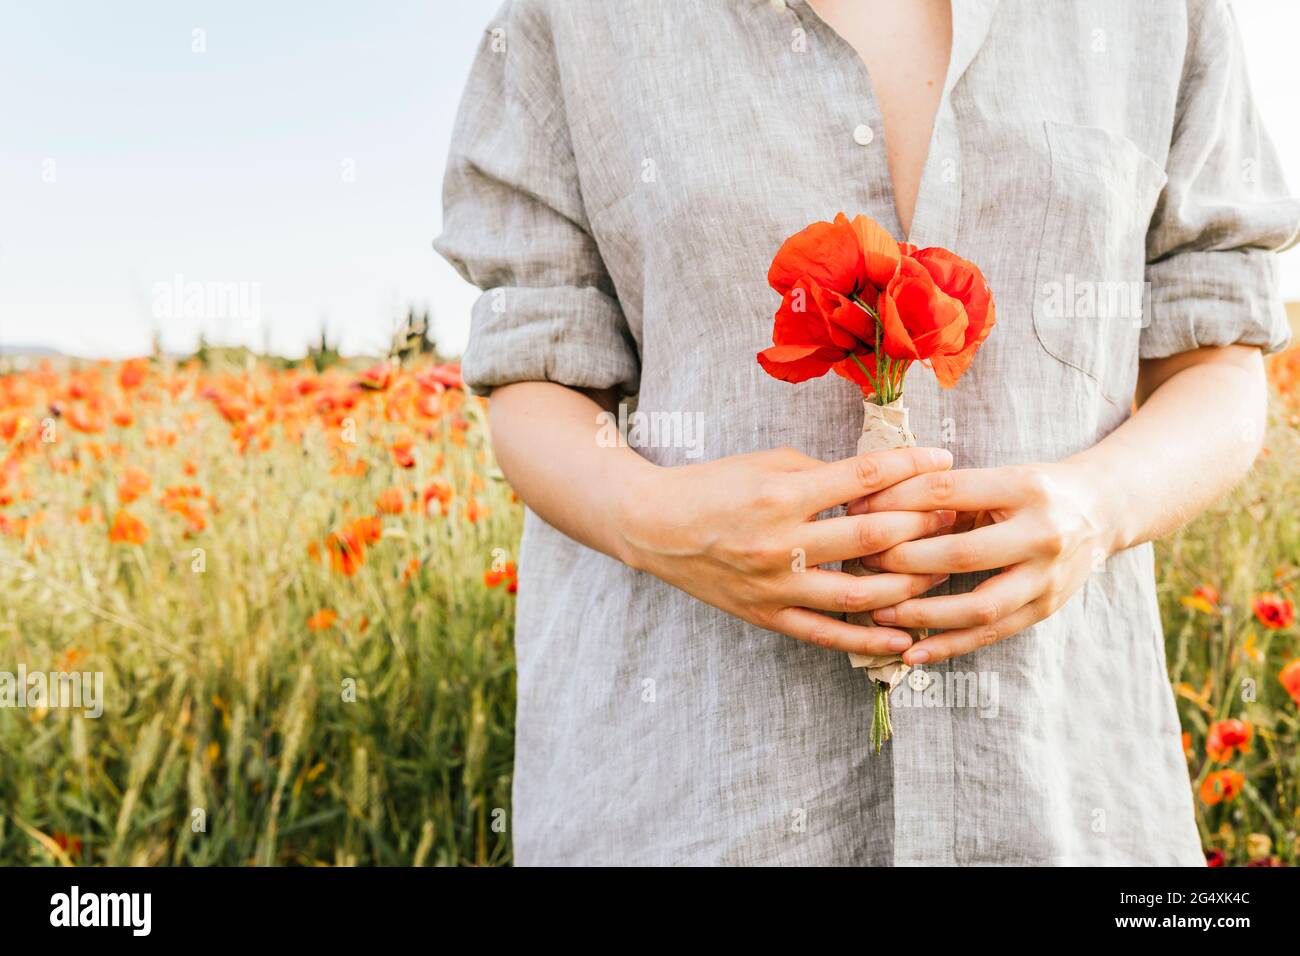 Mid adult woman wearing shirt holding poppy flowers at field Stock Photo